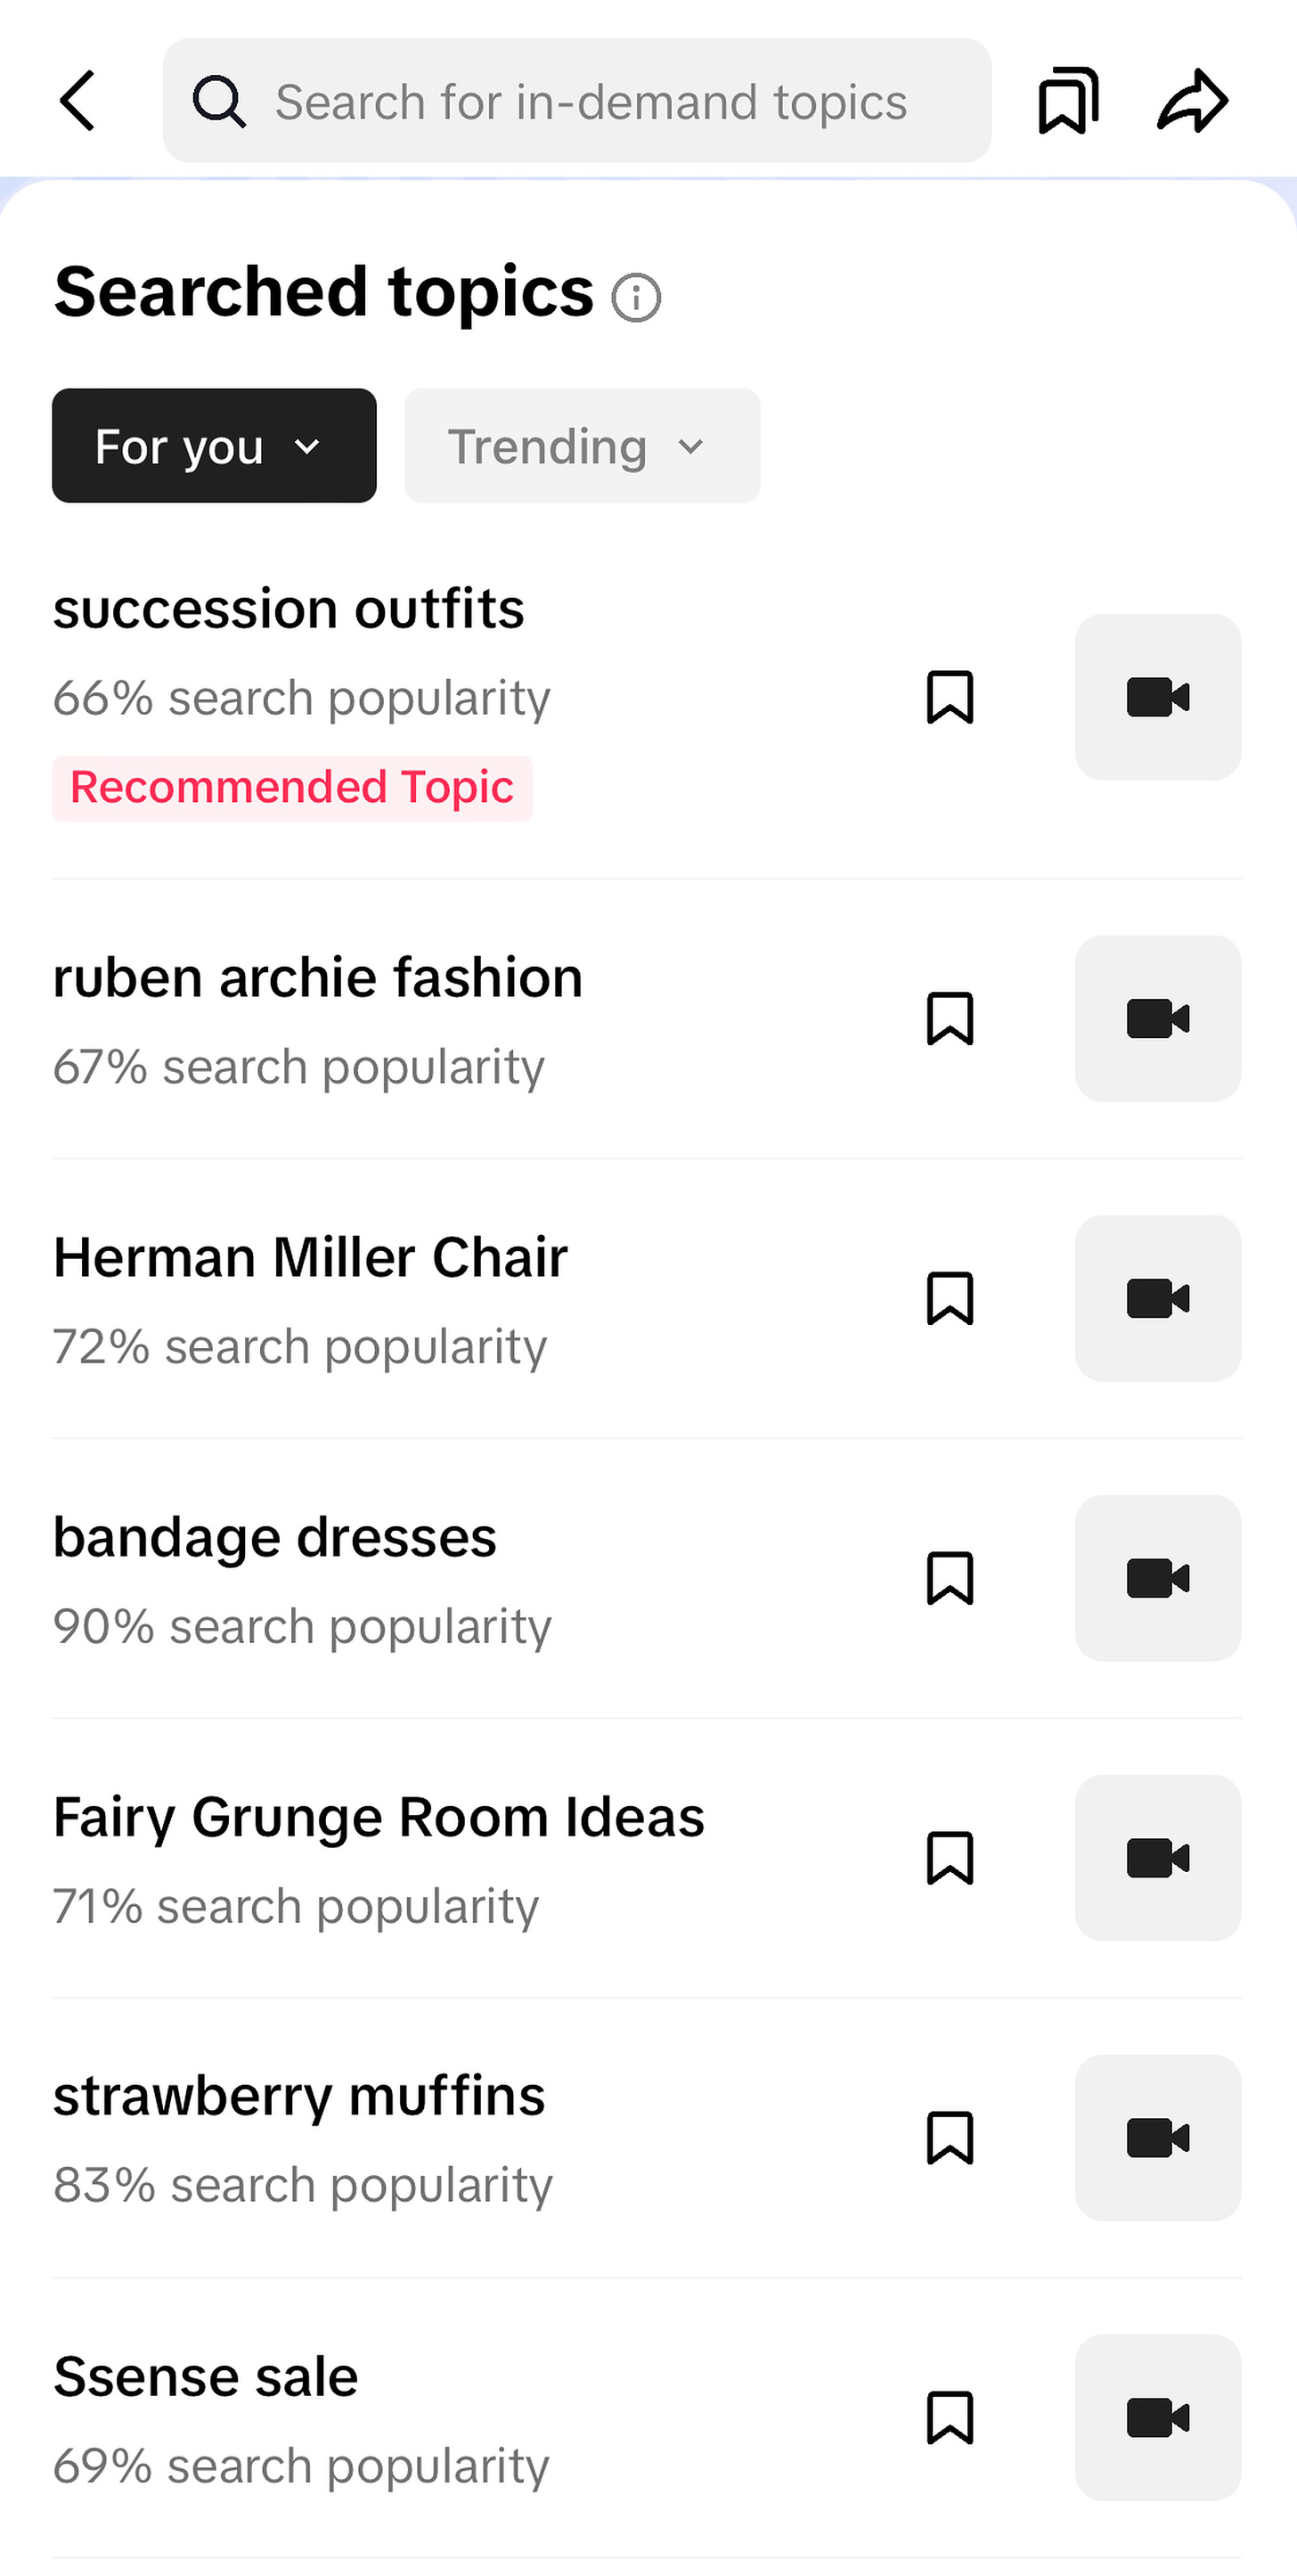 A TikTok insights screenshot showing recommended topics to make content about. Topping the list is “Succession outfits” with 66 percent search popularity.